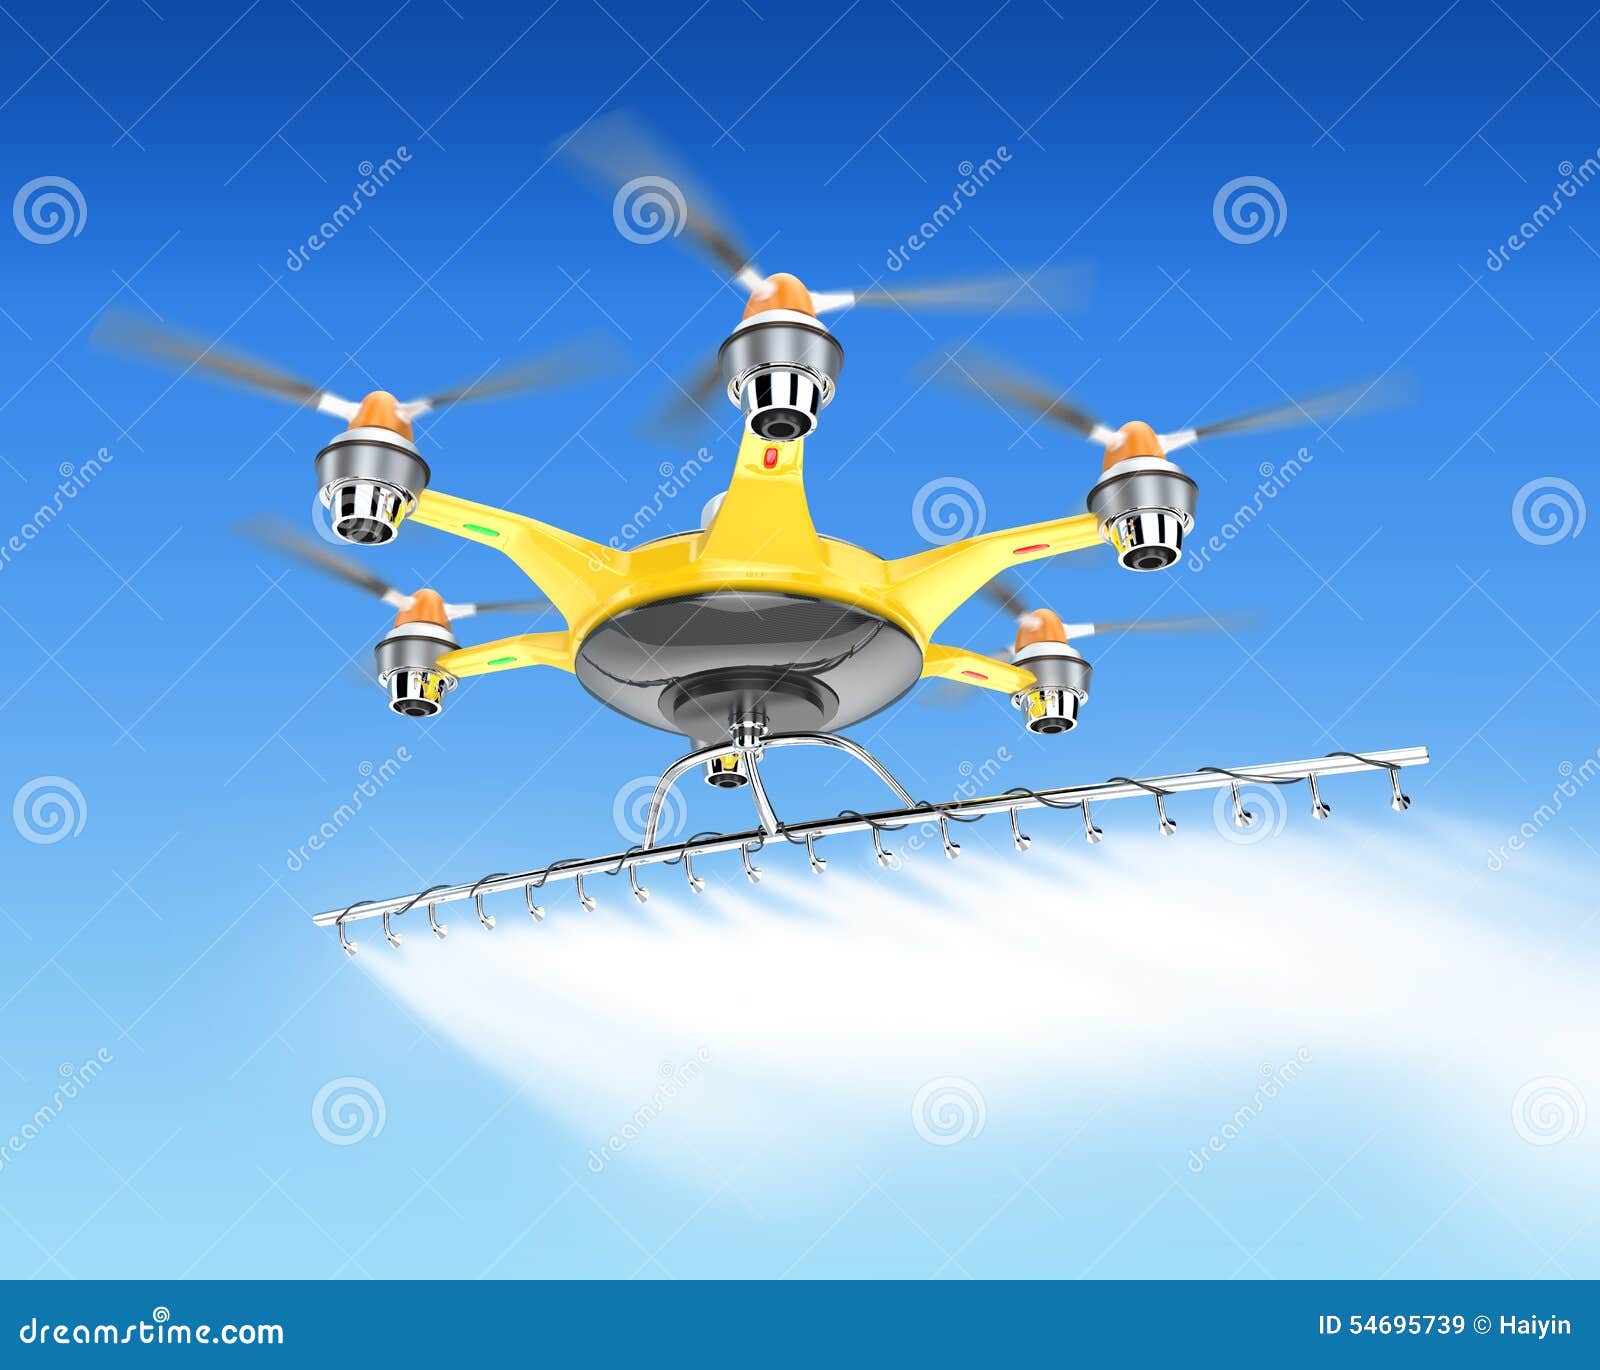 hexacopter with crop sprayer flying in the sky